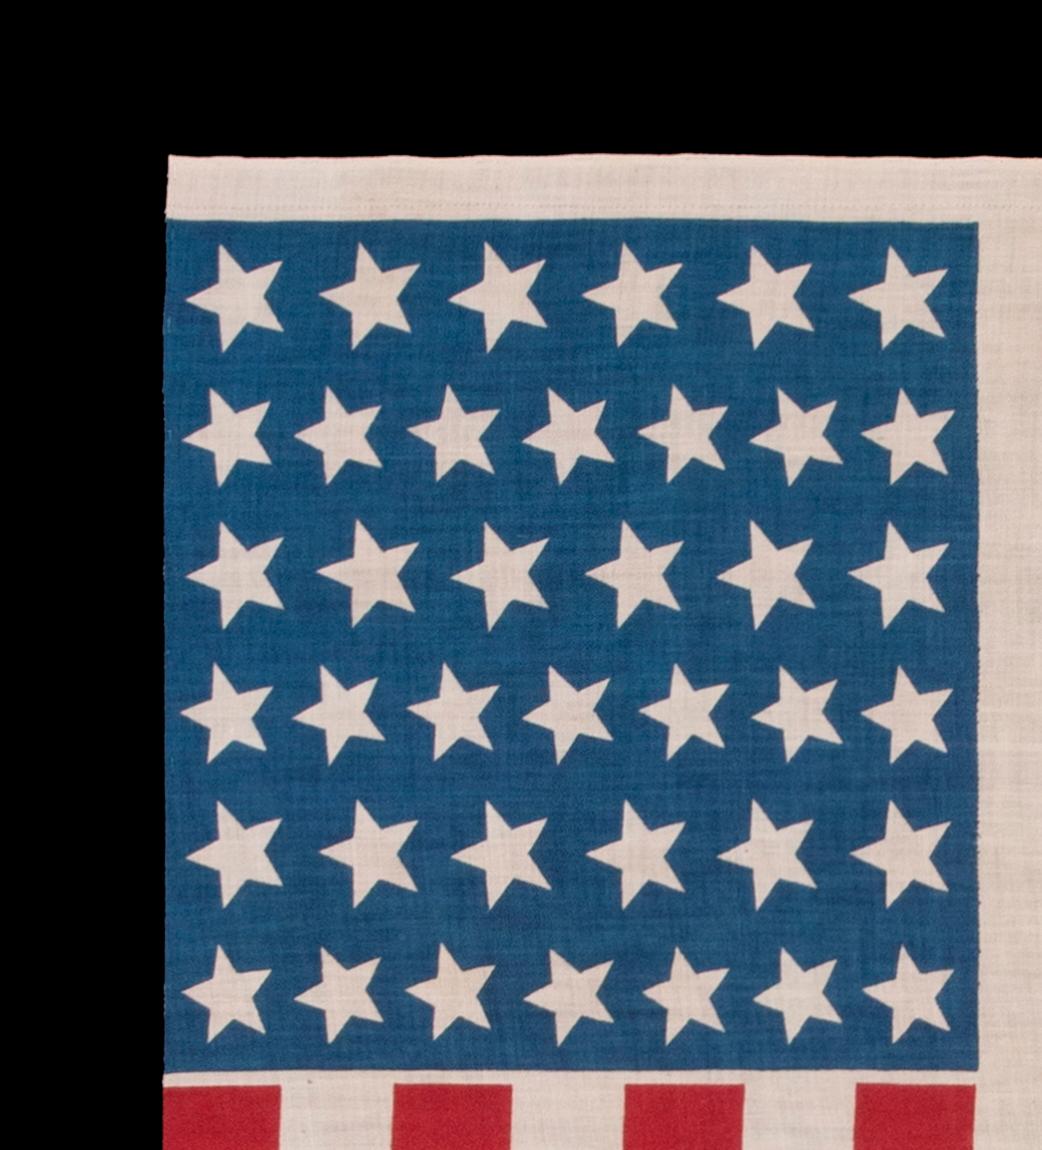 39 Star Antique American Flag, Dakota Territories, ca 1876 In Good Condition For Sale In York County, PA